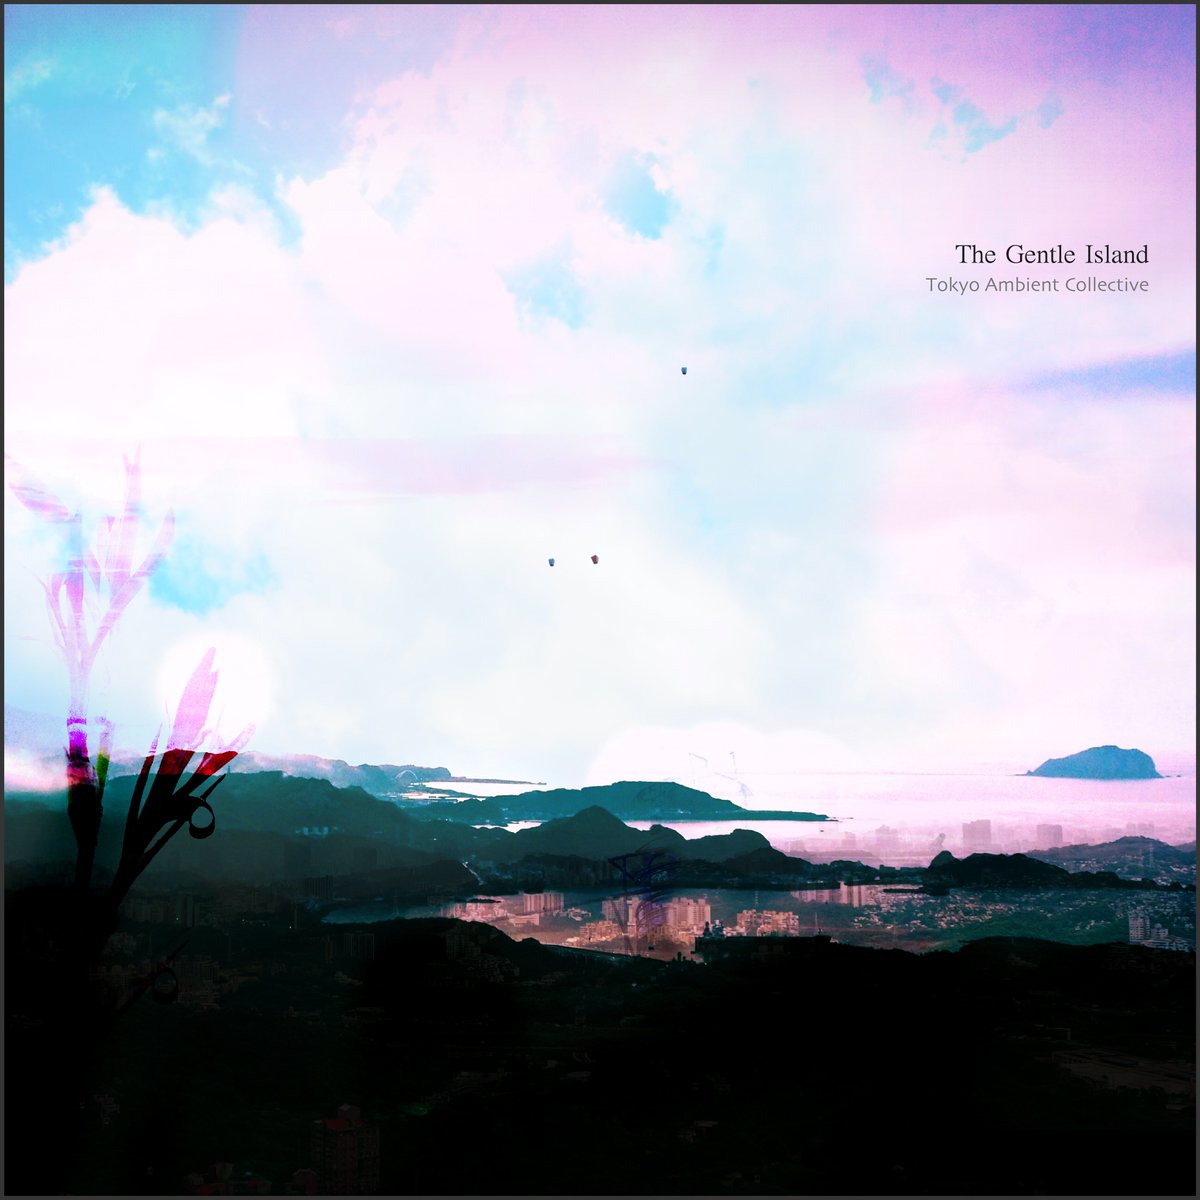 OUT TODAY: 4th album 'The Gentle Island' from Tokyo Ambient Collective which Takahiro Kido and Yuki Murata joined, is available on digital platforms. All the proceeds to yesterday on BandCamp will be donated as relief funds for Taiwan Hualien Earthquake. linkco.re/gXRQtpBt